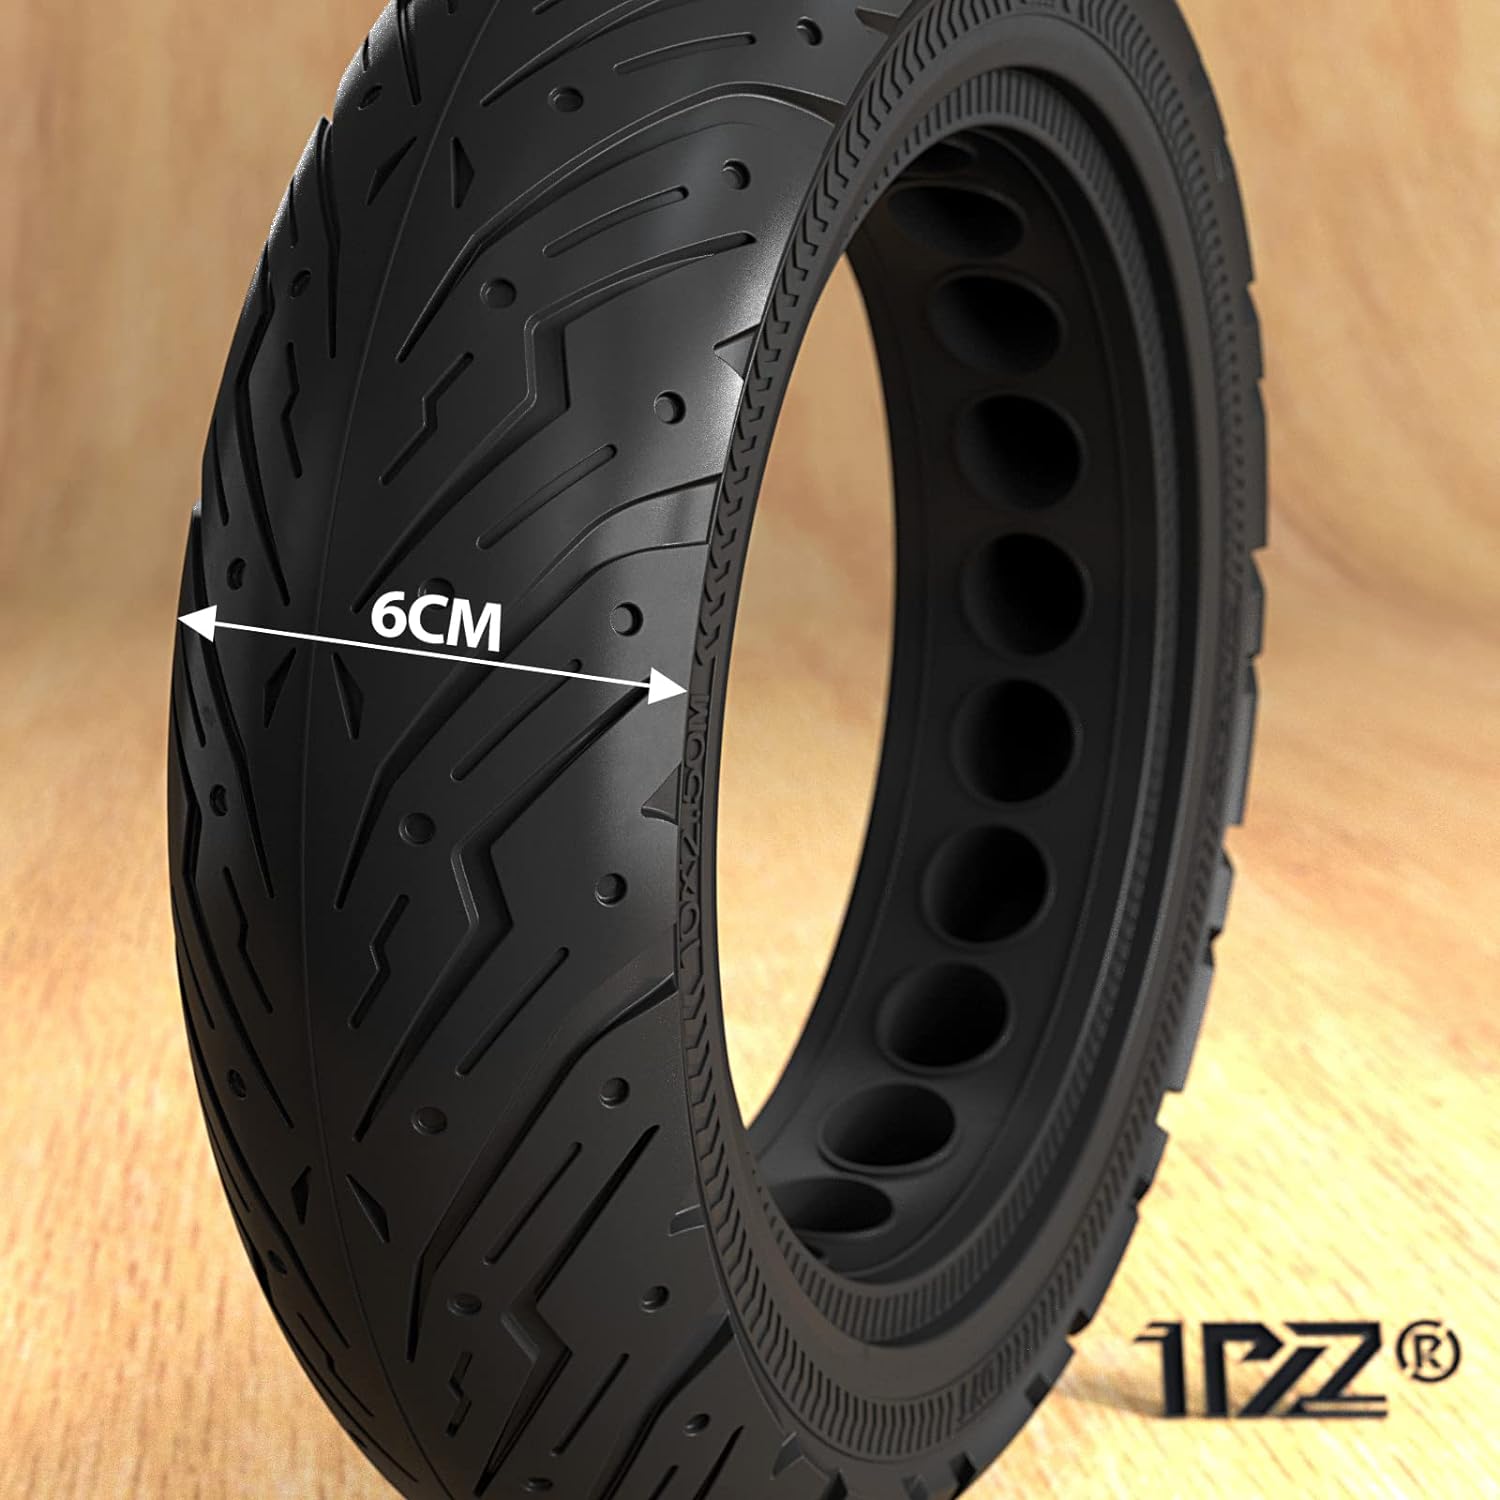 1PZ 10x2.50 Solid Tire 10 Inch Rubber Tire Wheel Front Rear Tire Replacement for Ninebot MAX G30 Electric Scooter